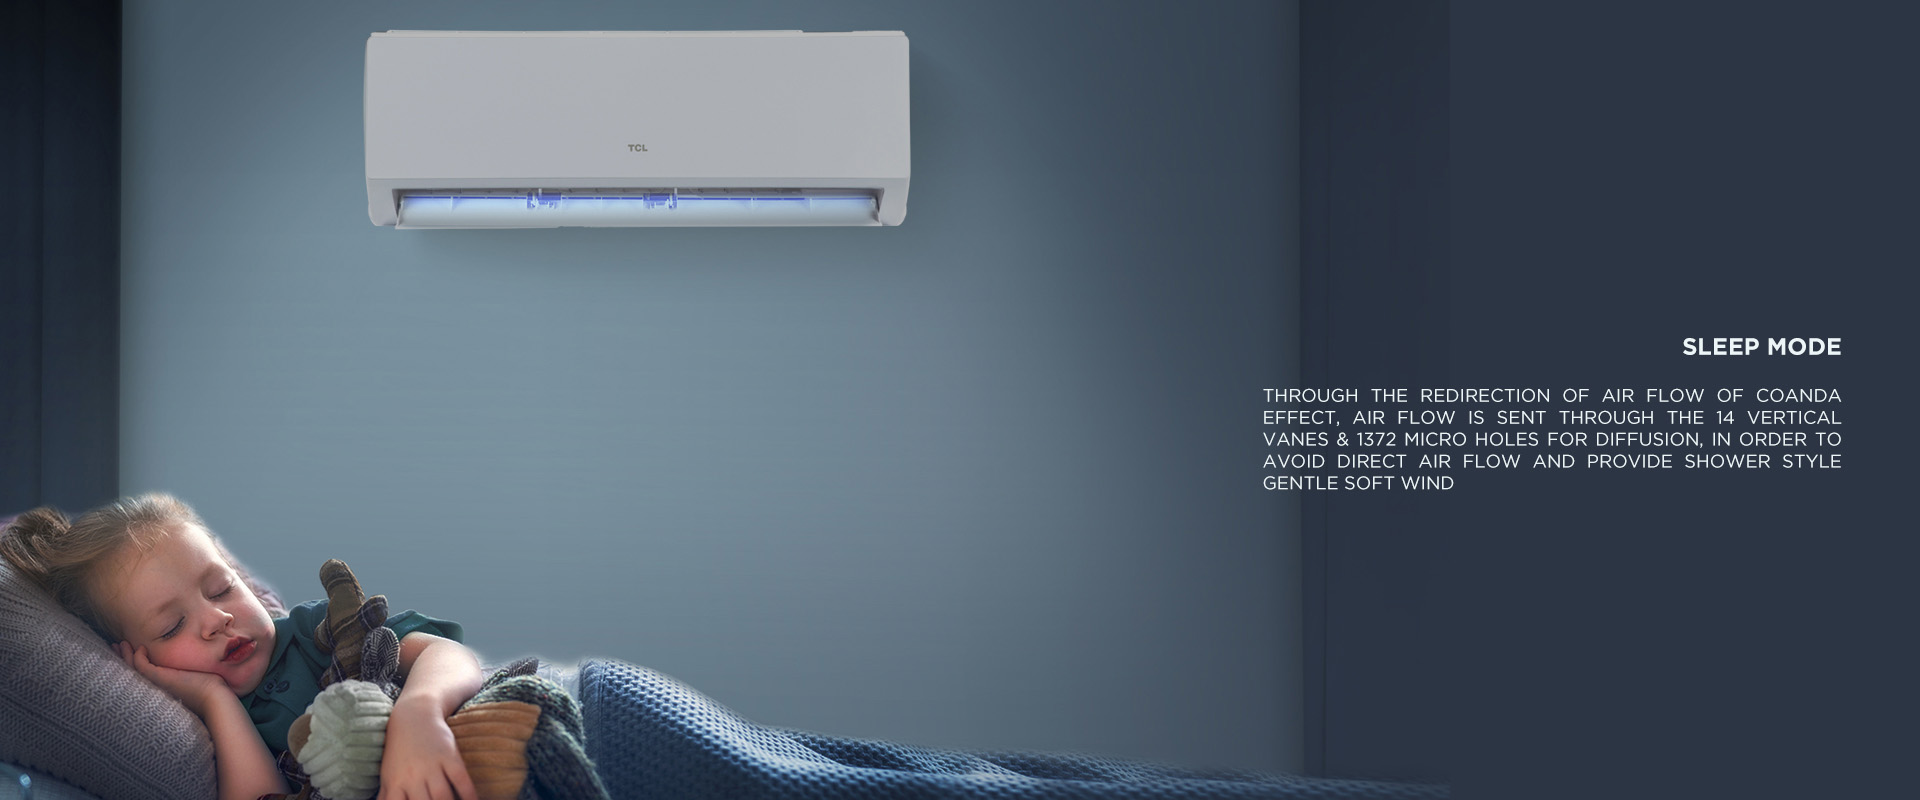 Sleep Mode - Through the redirection of air flow of Coanda effect, air flow is sent through the 14 Vertical Vanes & 1372 Micro Holes for diffusion, in order to avoid direct air flow and provide shower style gentle soft wind 